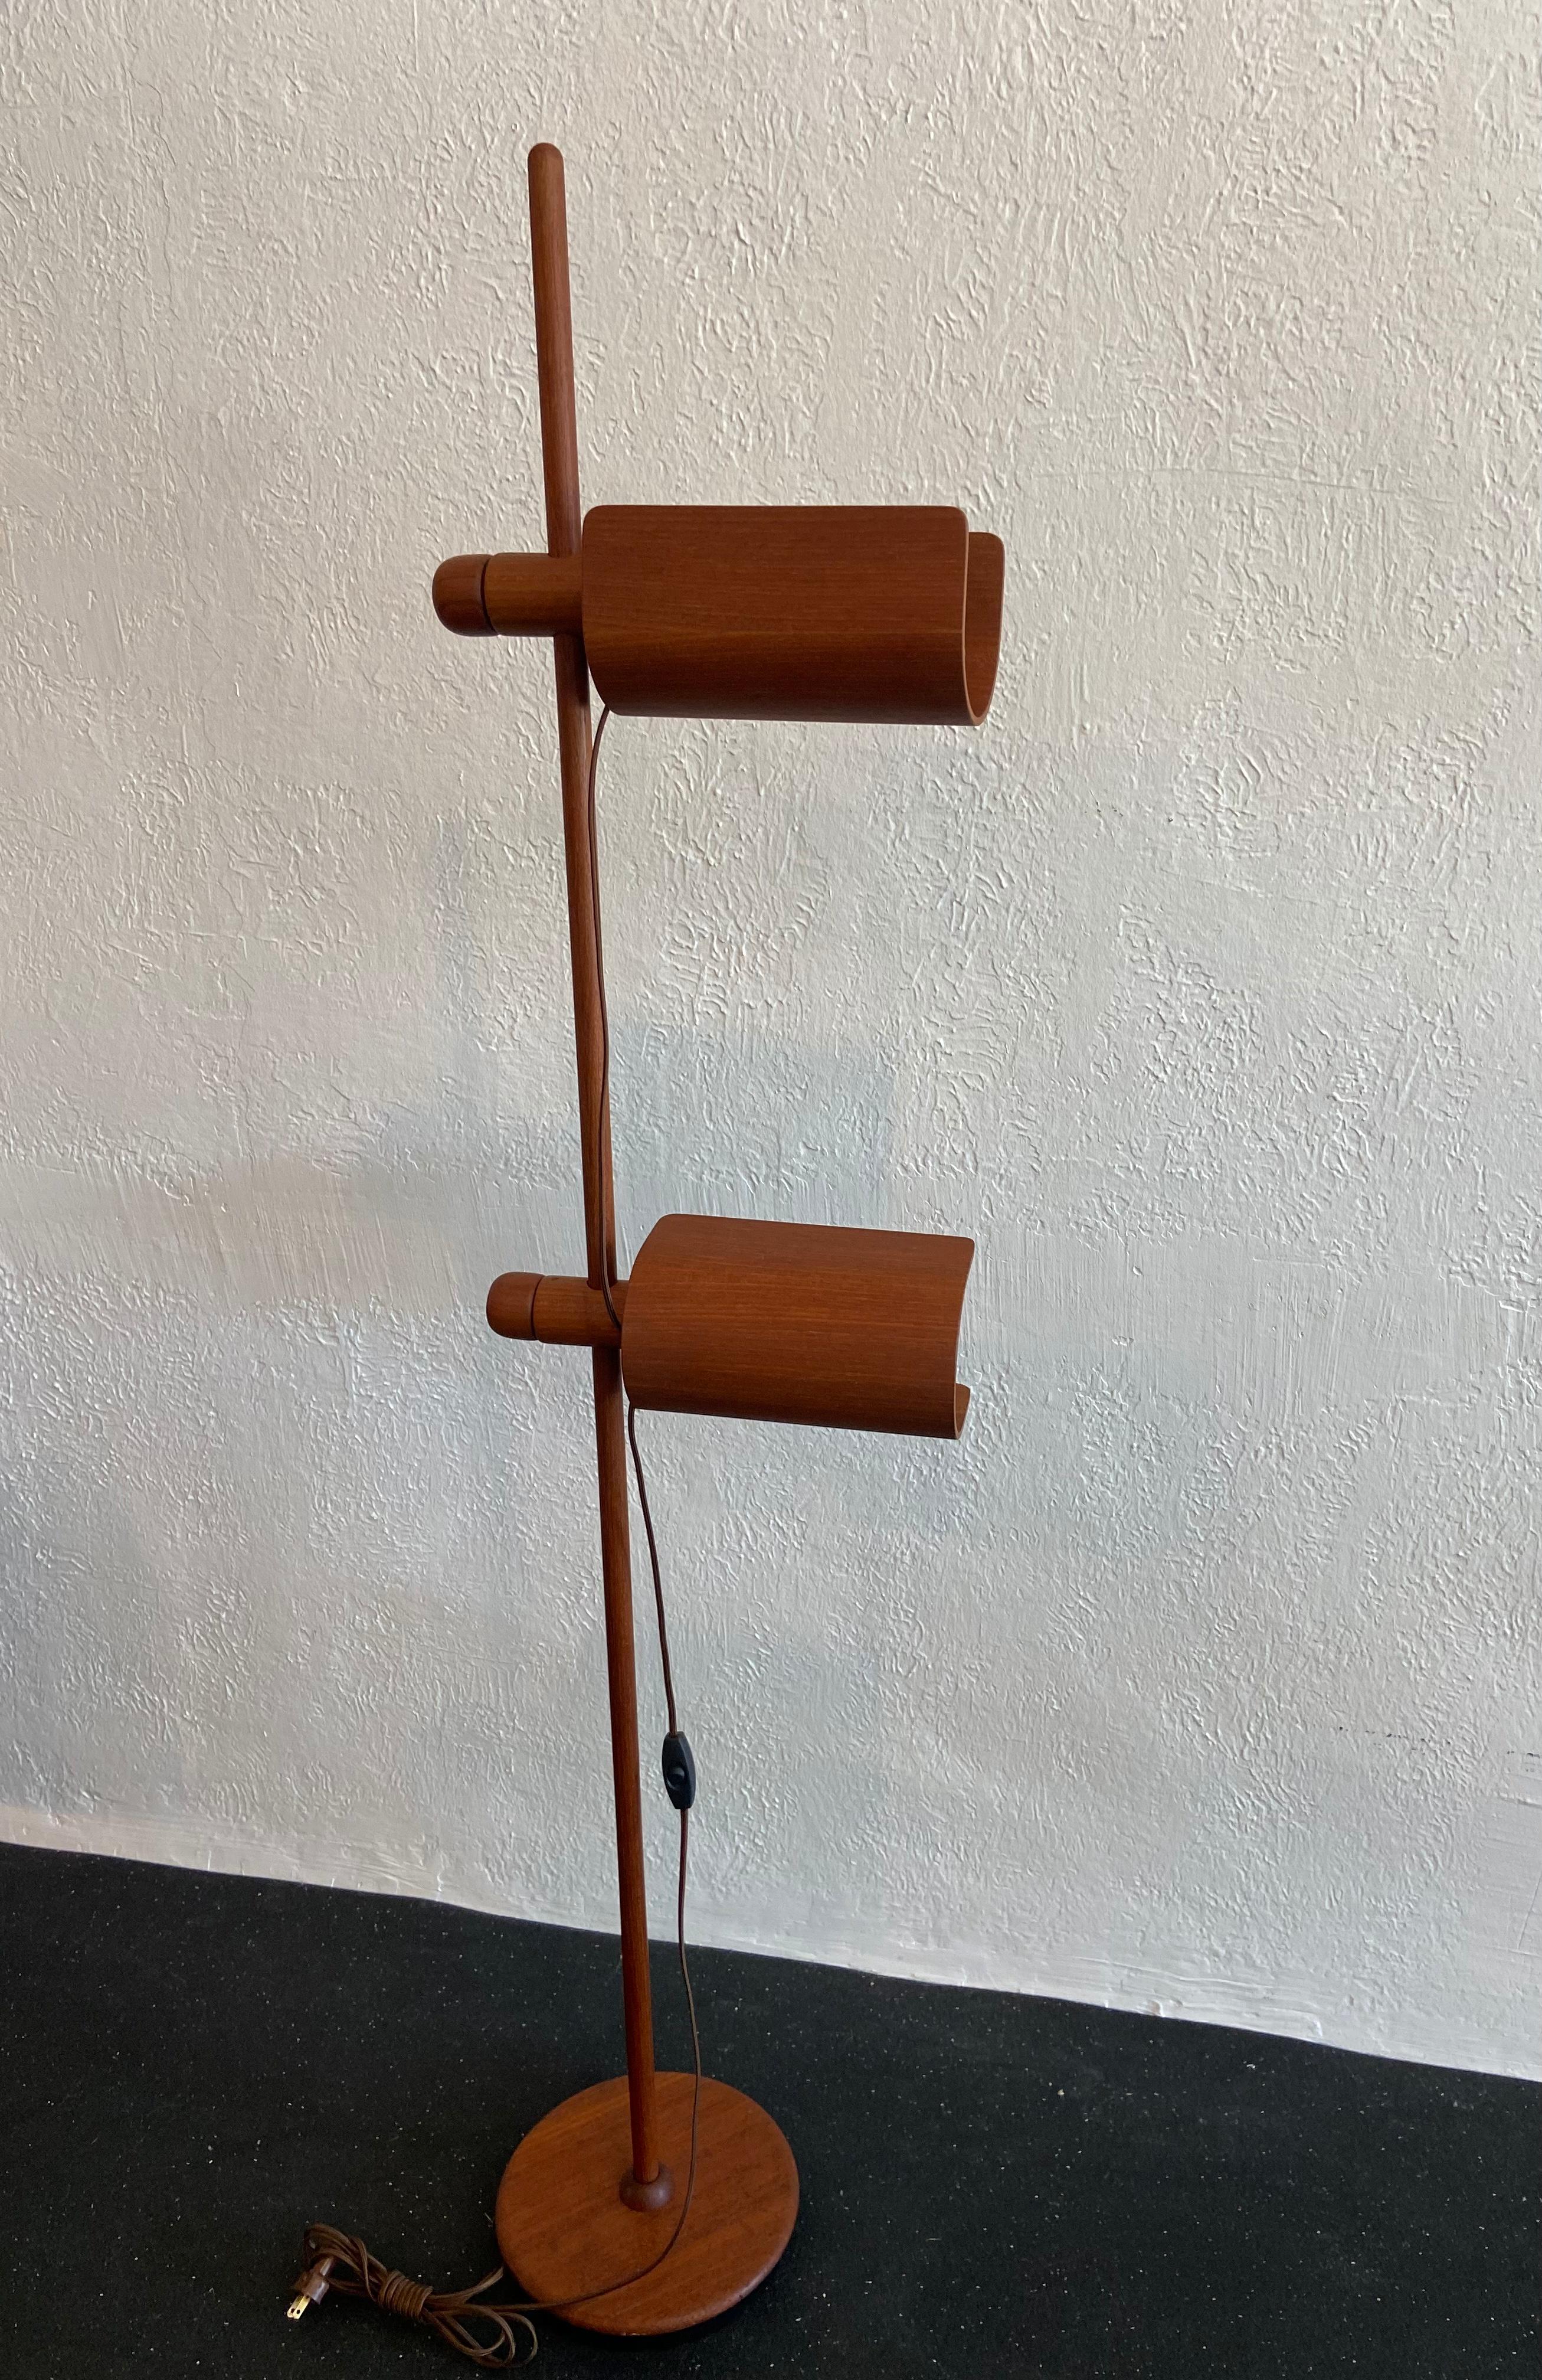 Fully adjustable German made teak floor lamp. Newly rewired with silk cord. Last two photos show repair on plastic bulb housing (please refer to photos).

Would work well in a variety of interiors such as modern, mid century modern, Hollywood